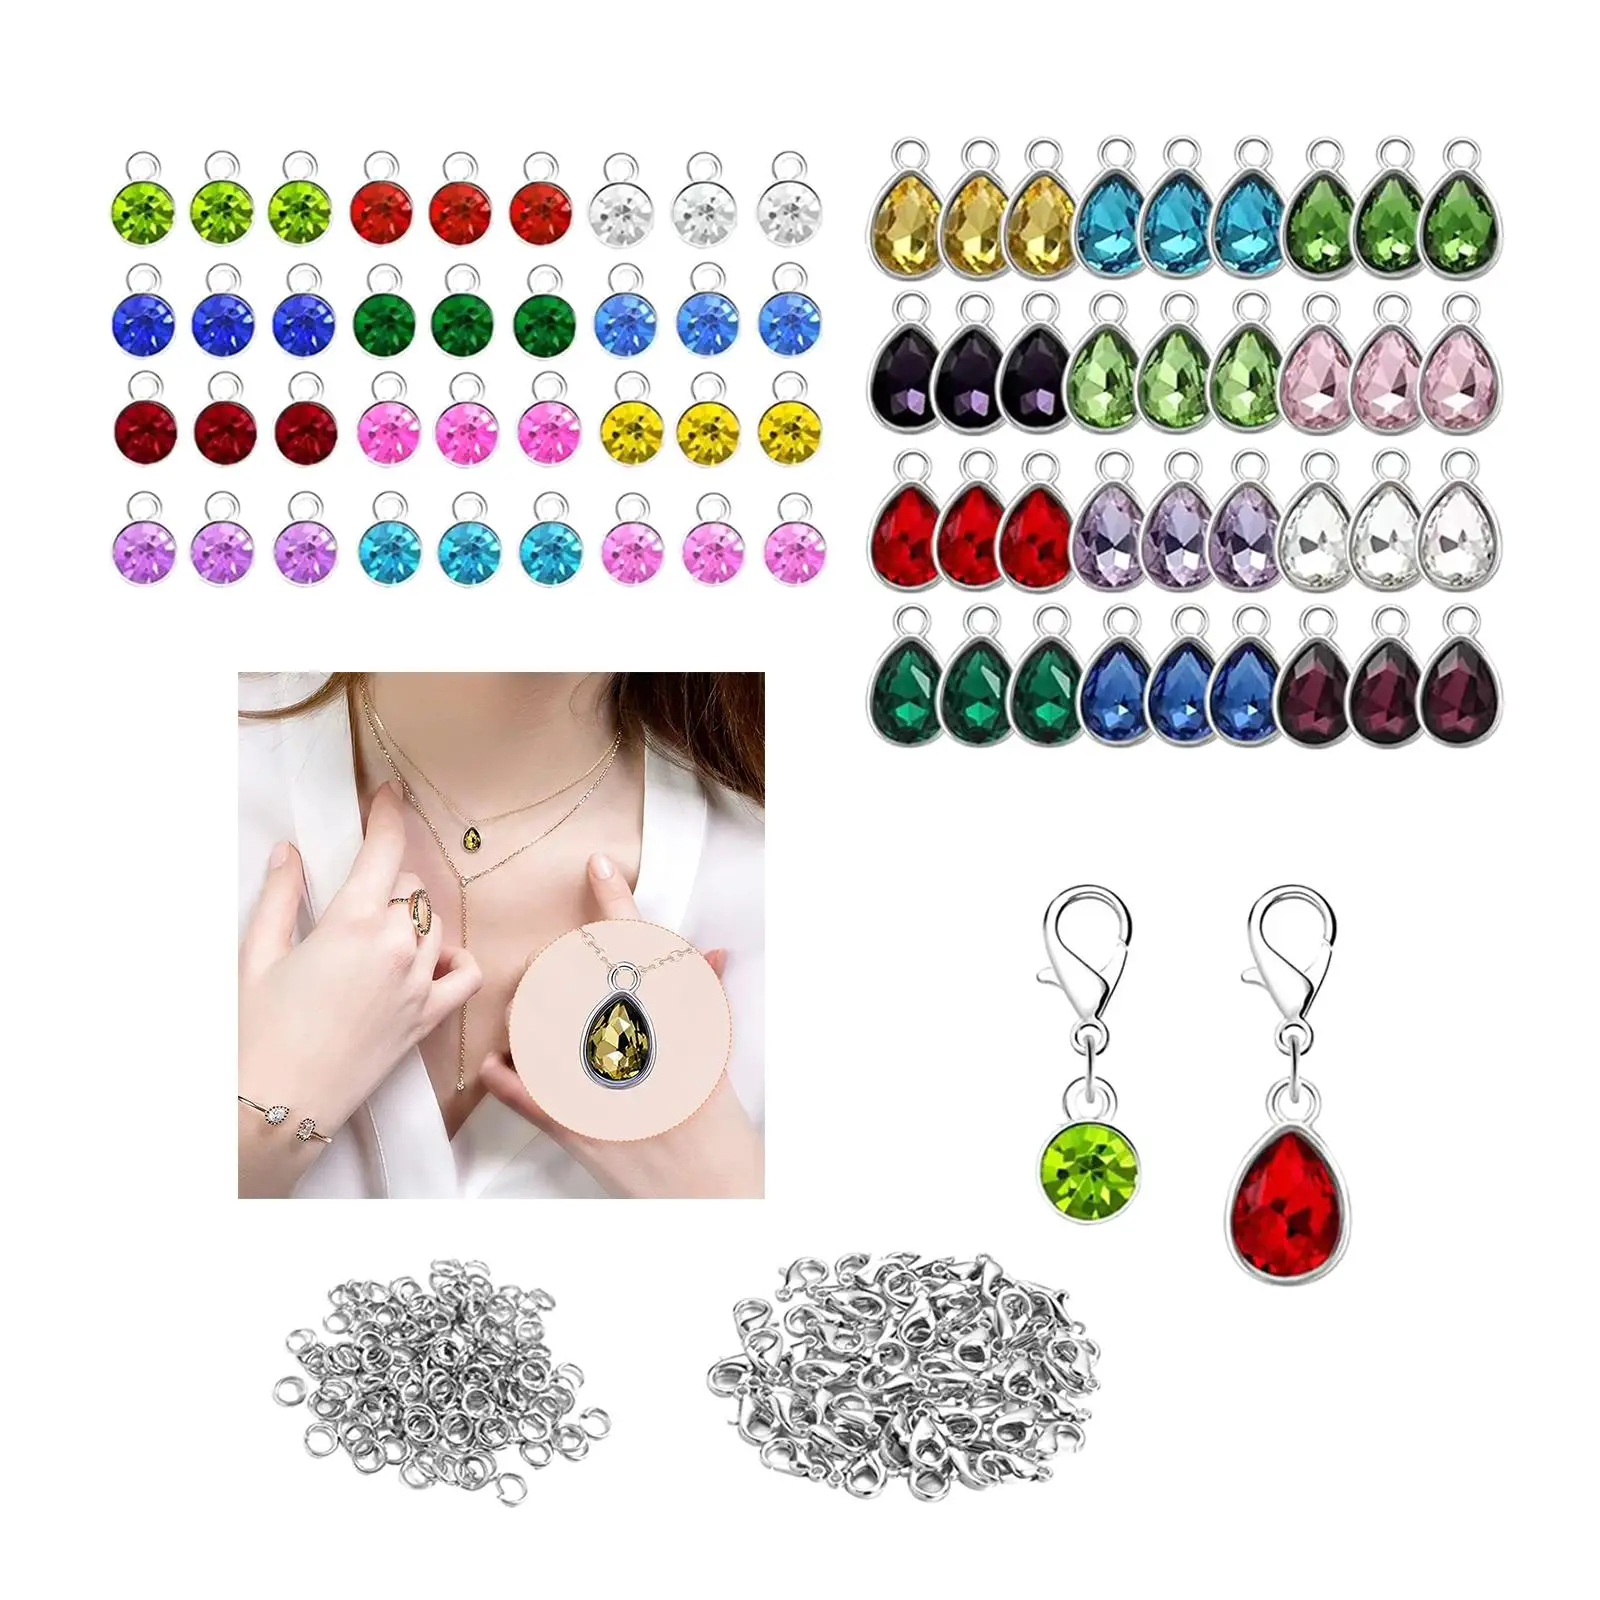 Modern Crystal Birthstone Charms Pendants Beads Pendant Zinc Alloy Mixed Color Gift for Jewellery Making Kit Crafting Home Decor